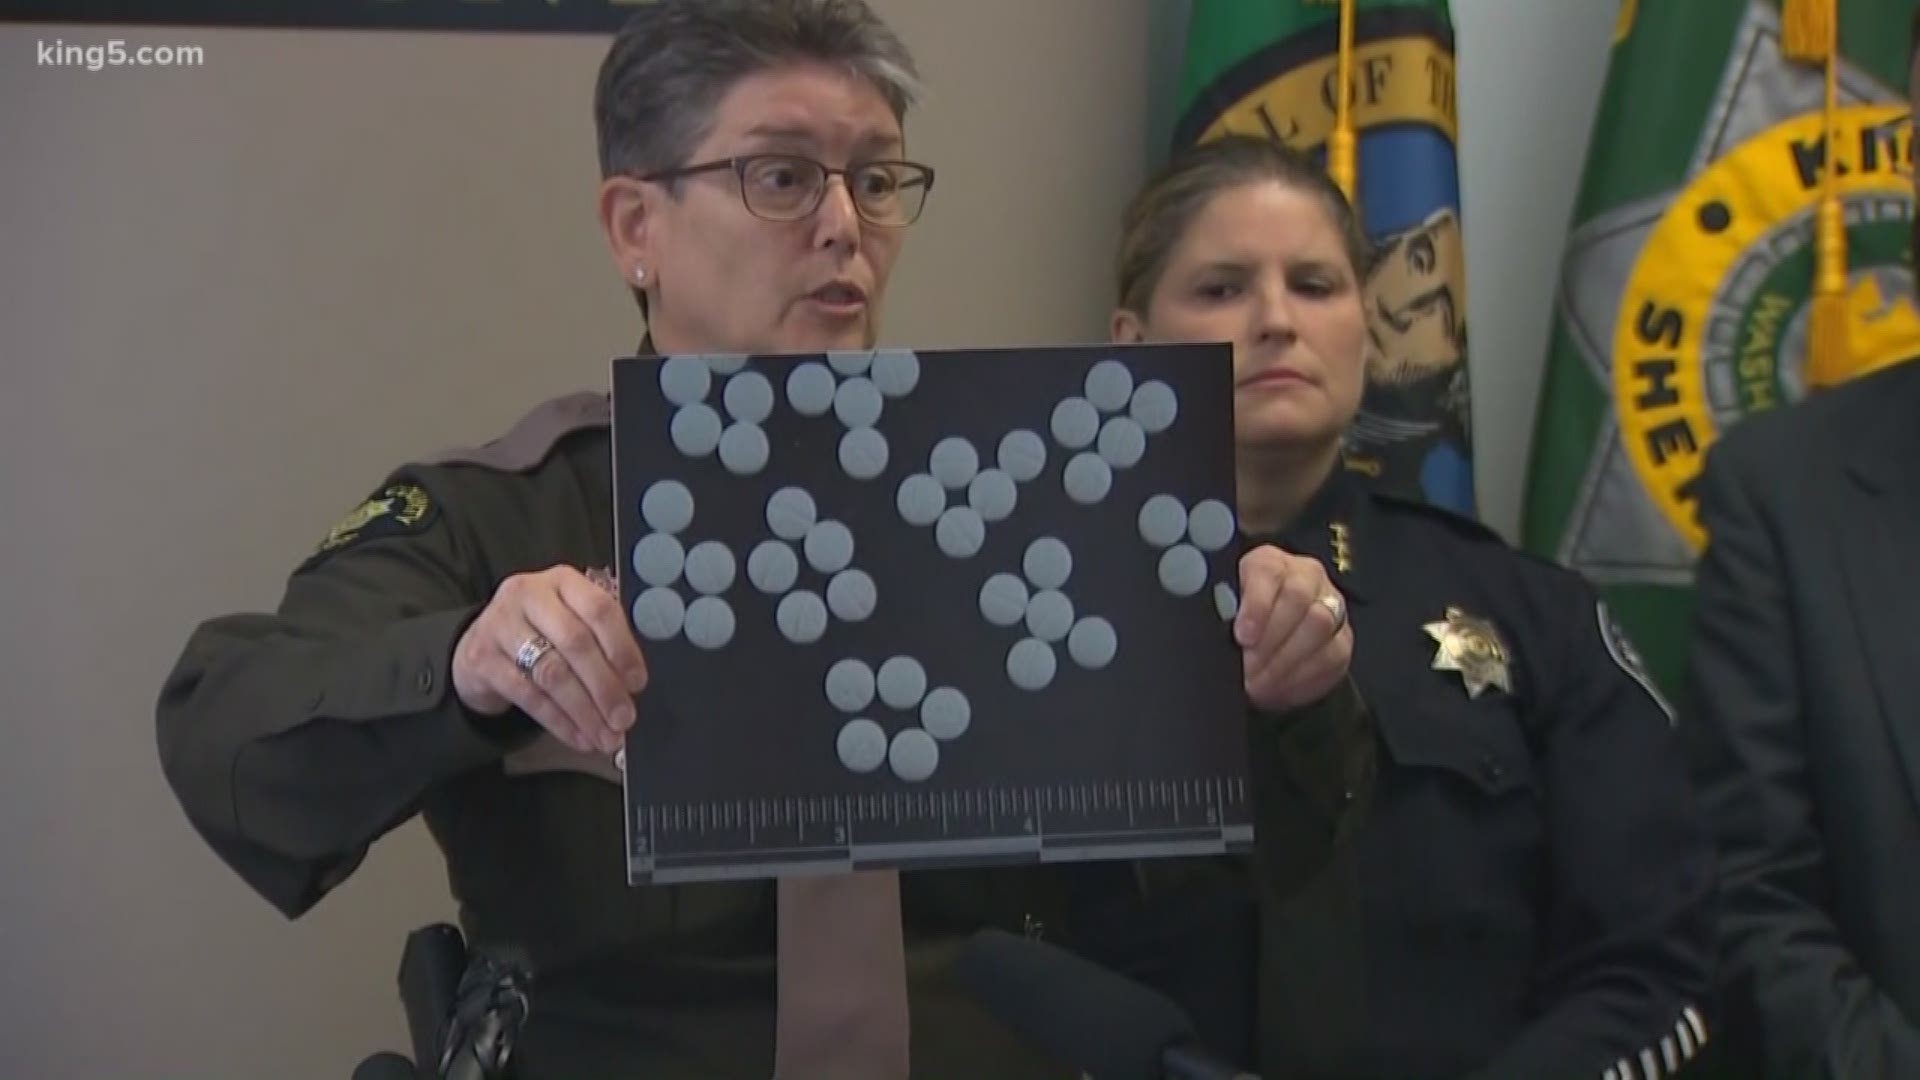 The King County Sheriff's Office believes two Skyline High School teens overdosed on pills contaminated with fentanyl.